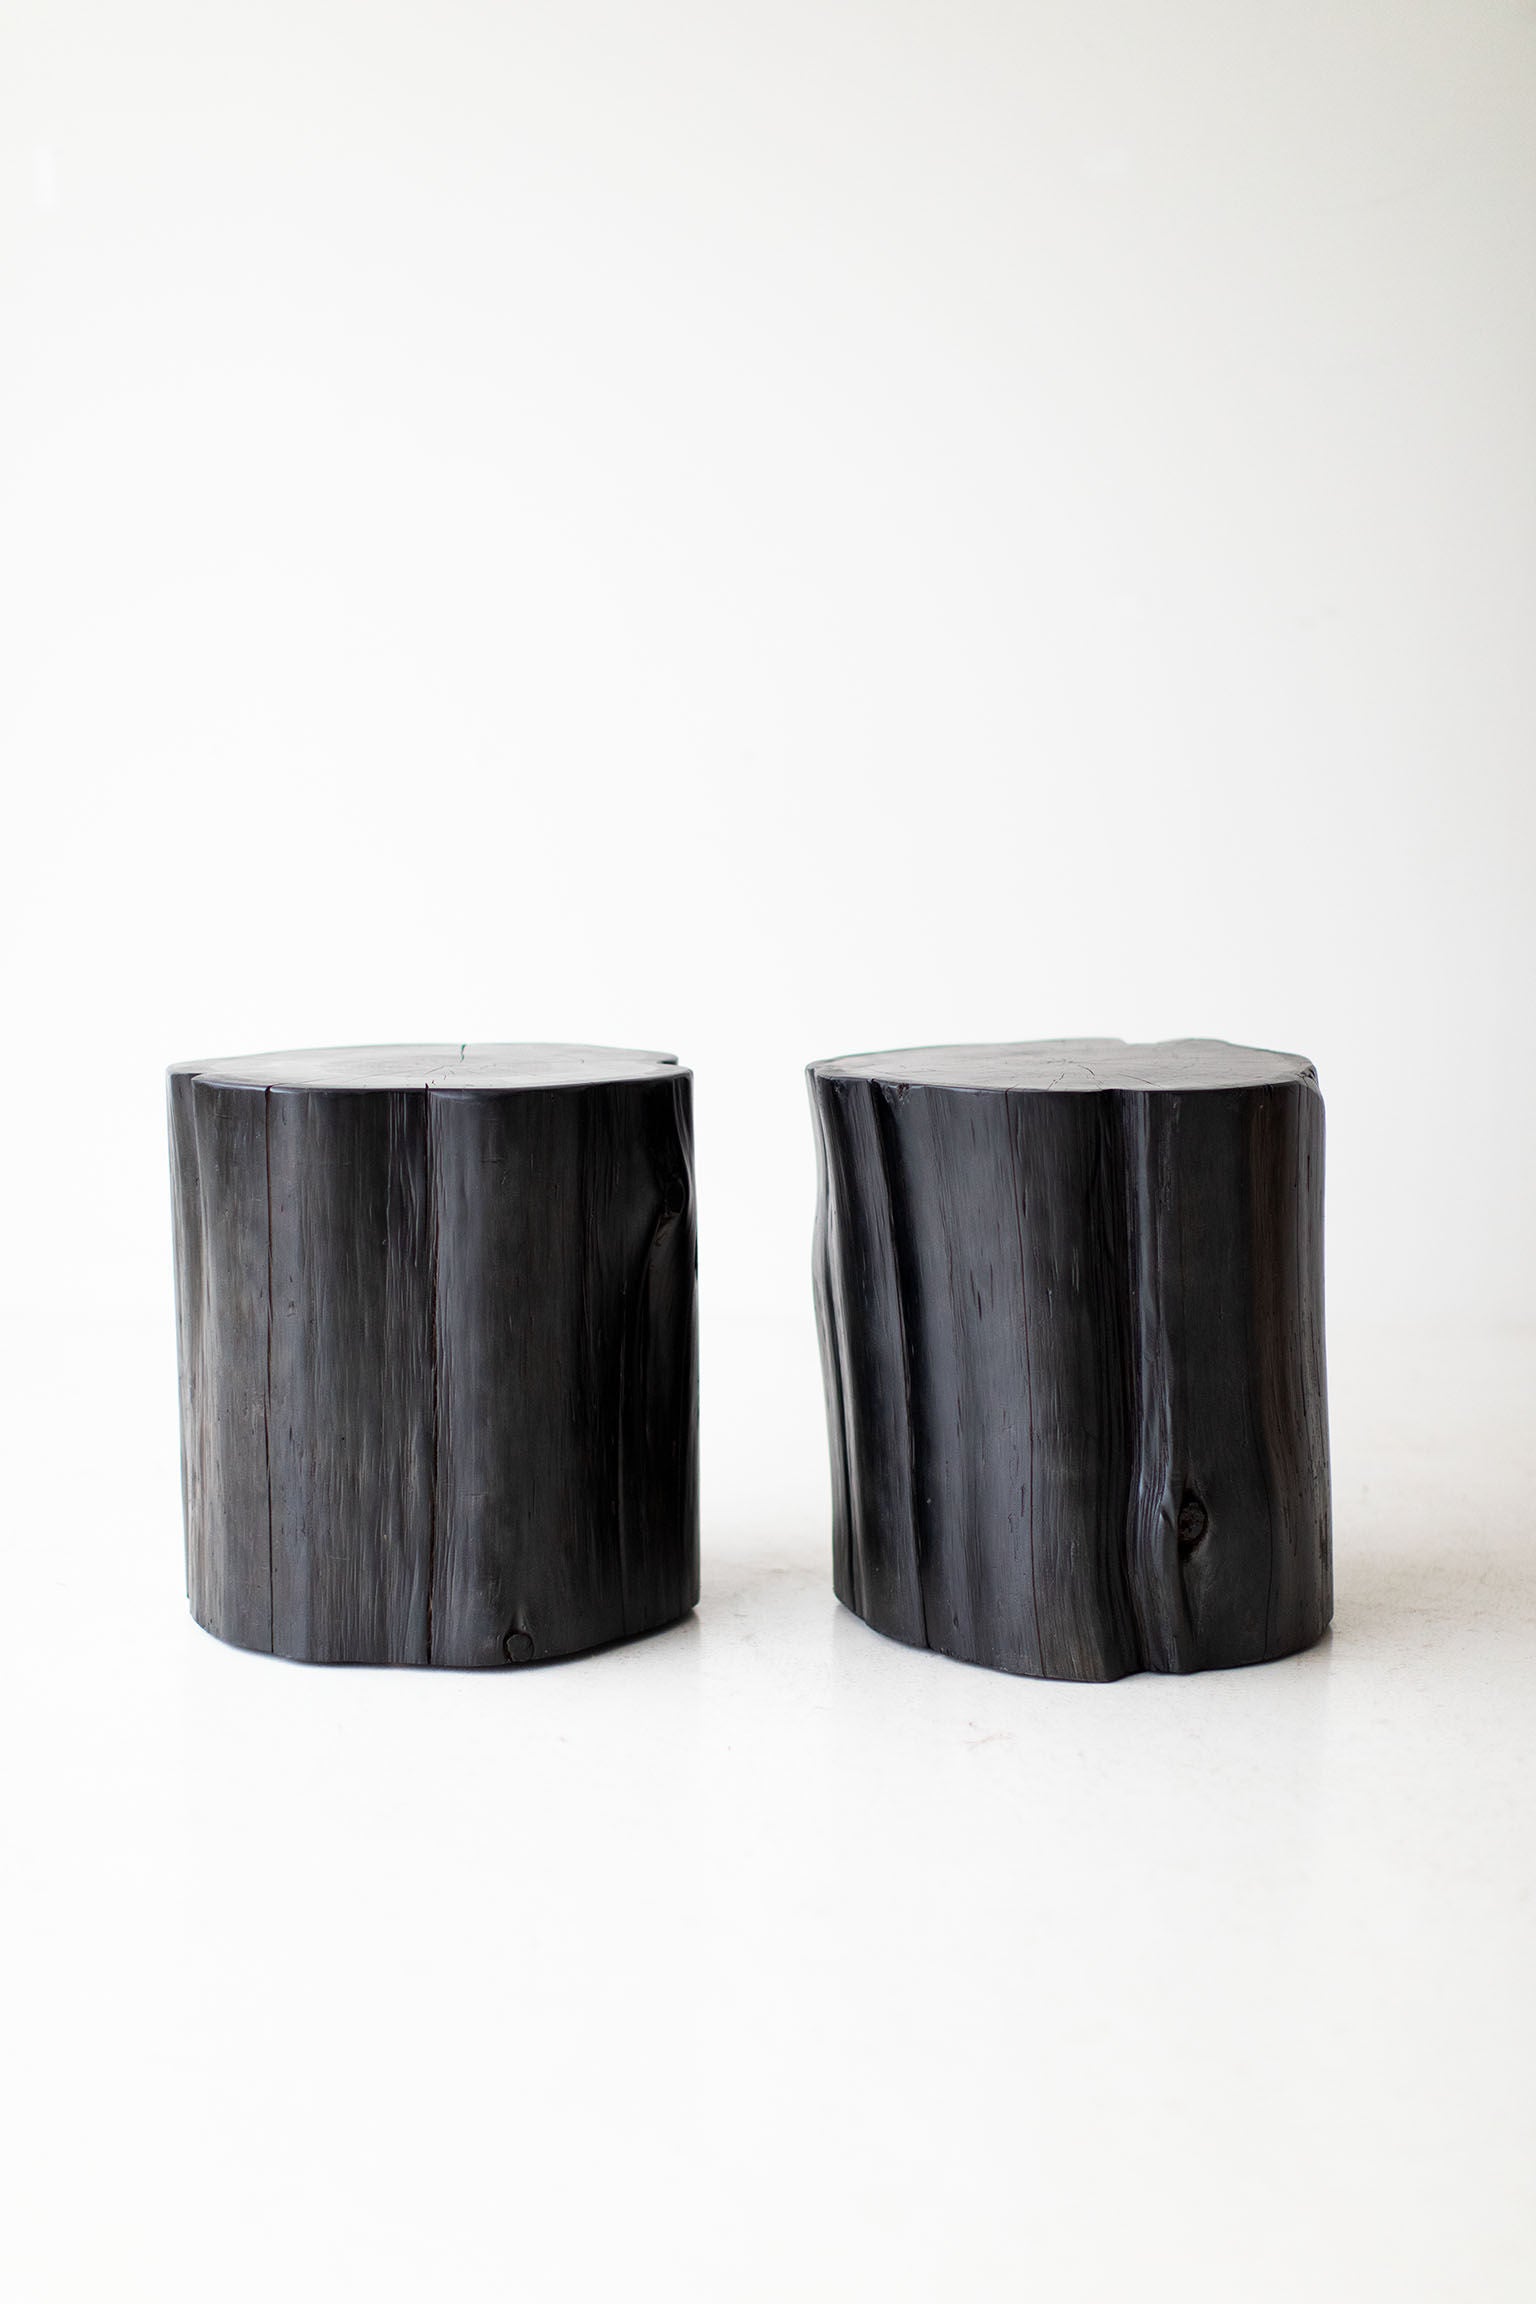 Large Outdoor Tree Stump Side Tables in Black - 3922